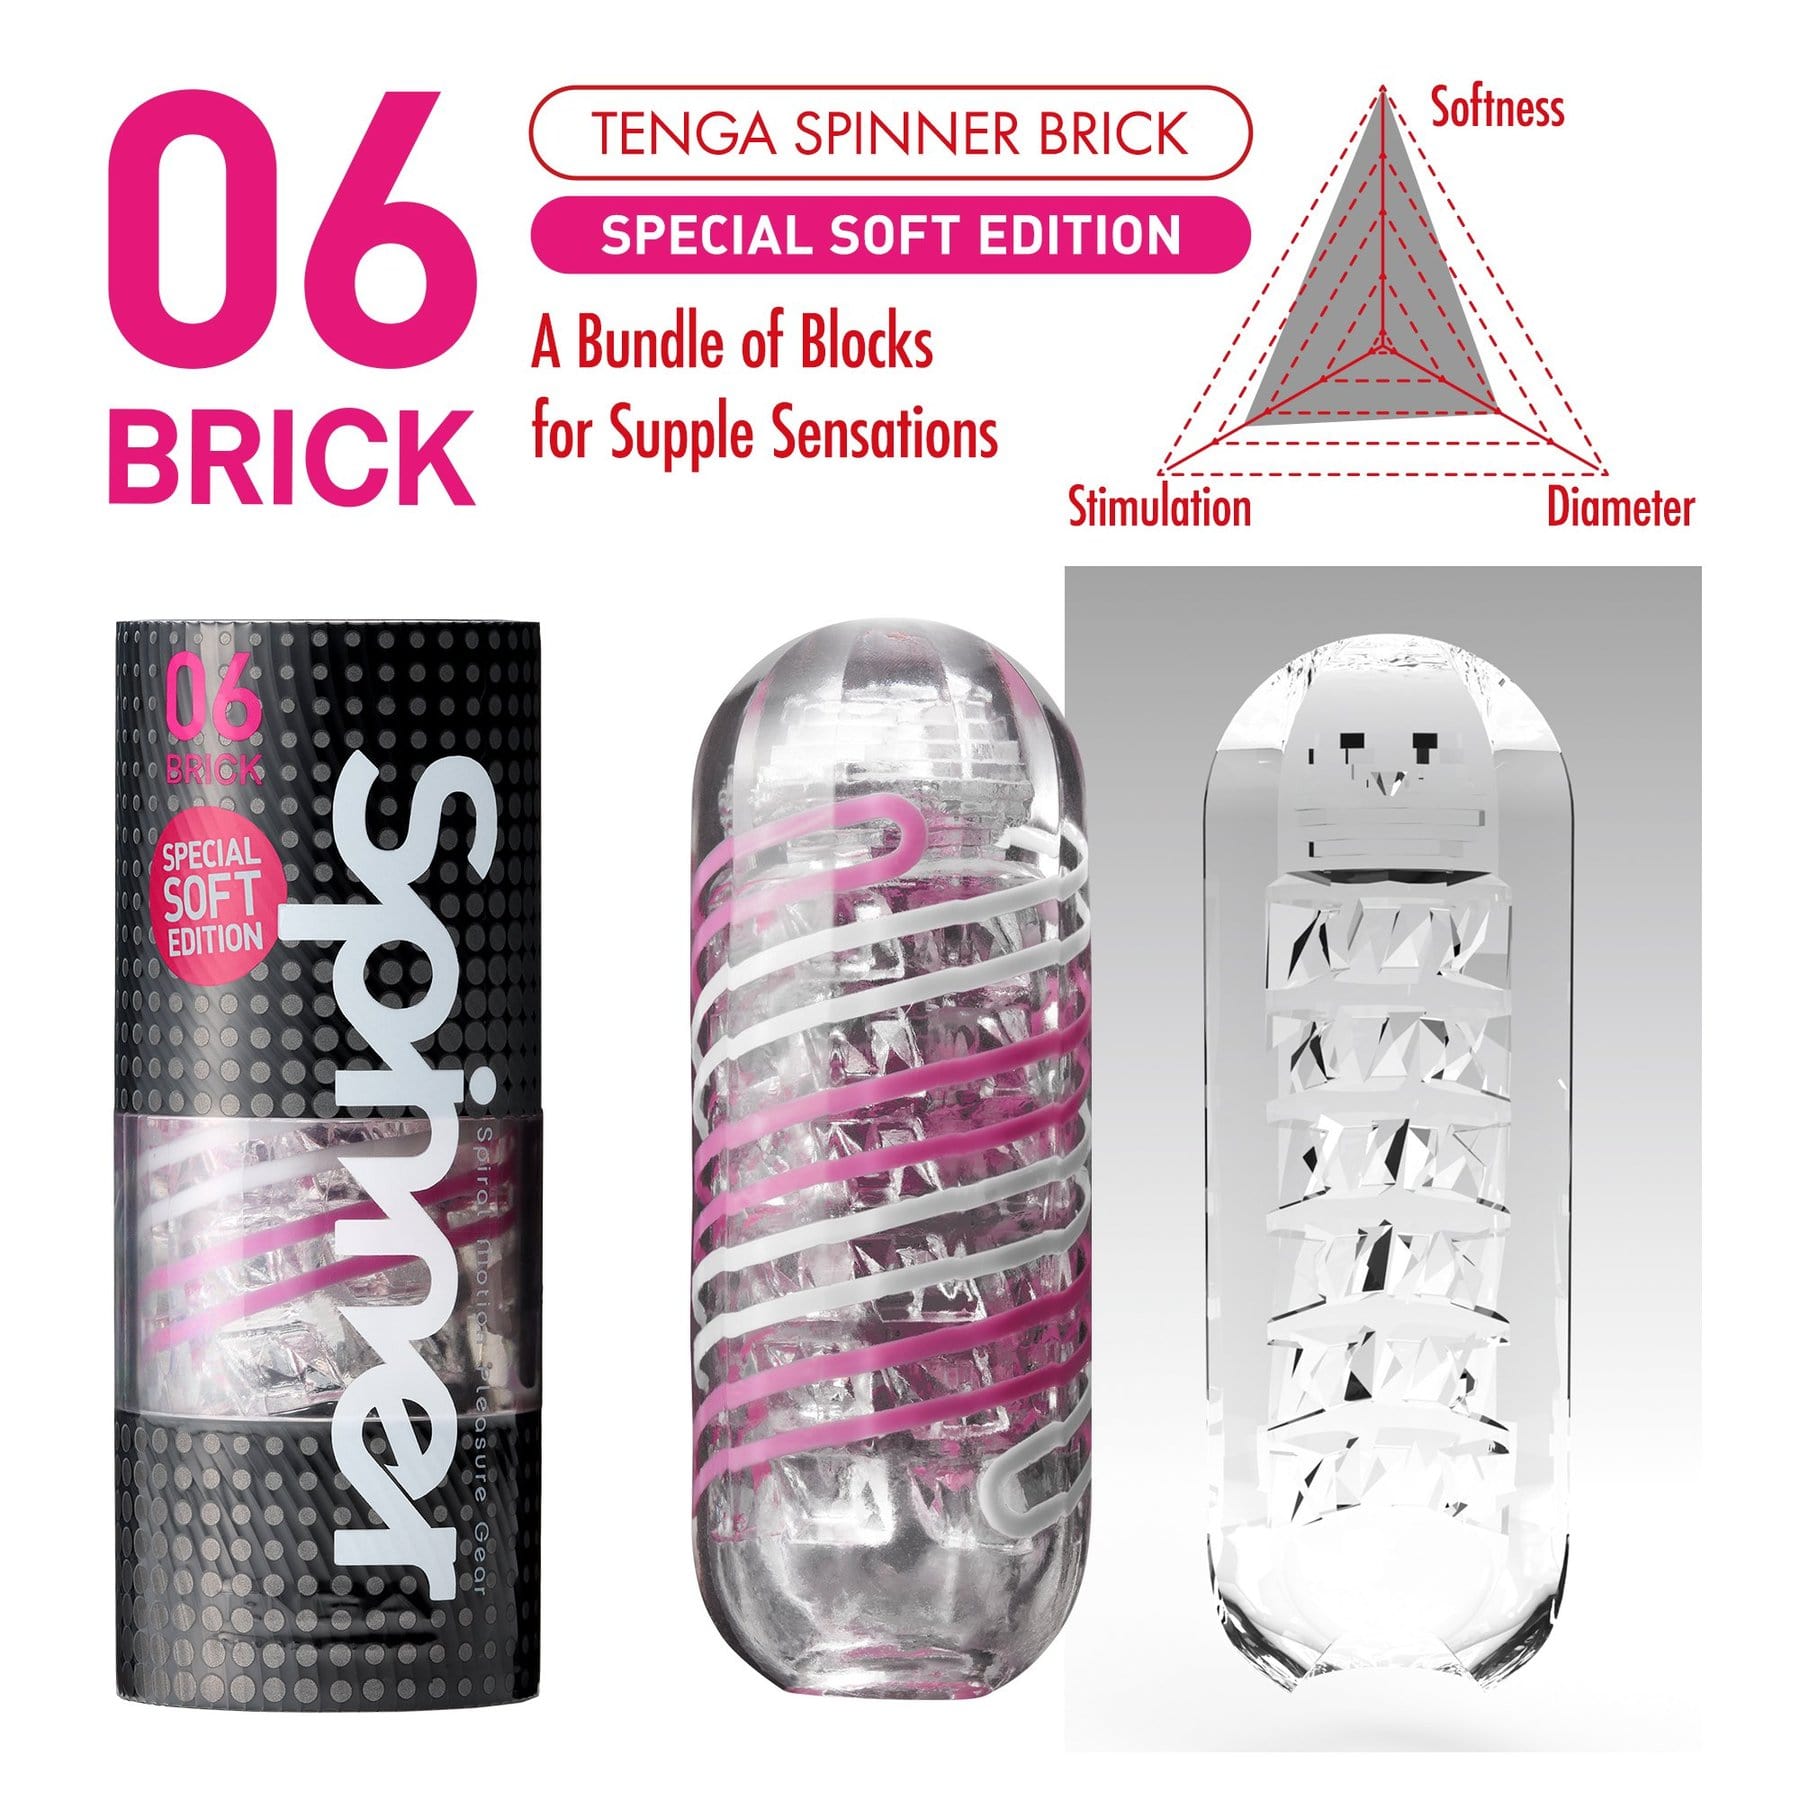 Tenga Spinner Special Soft Edition - 06 BRICK - Thorn & Feather Sex Toy Canada